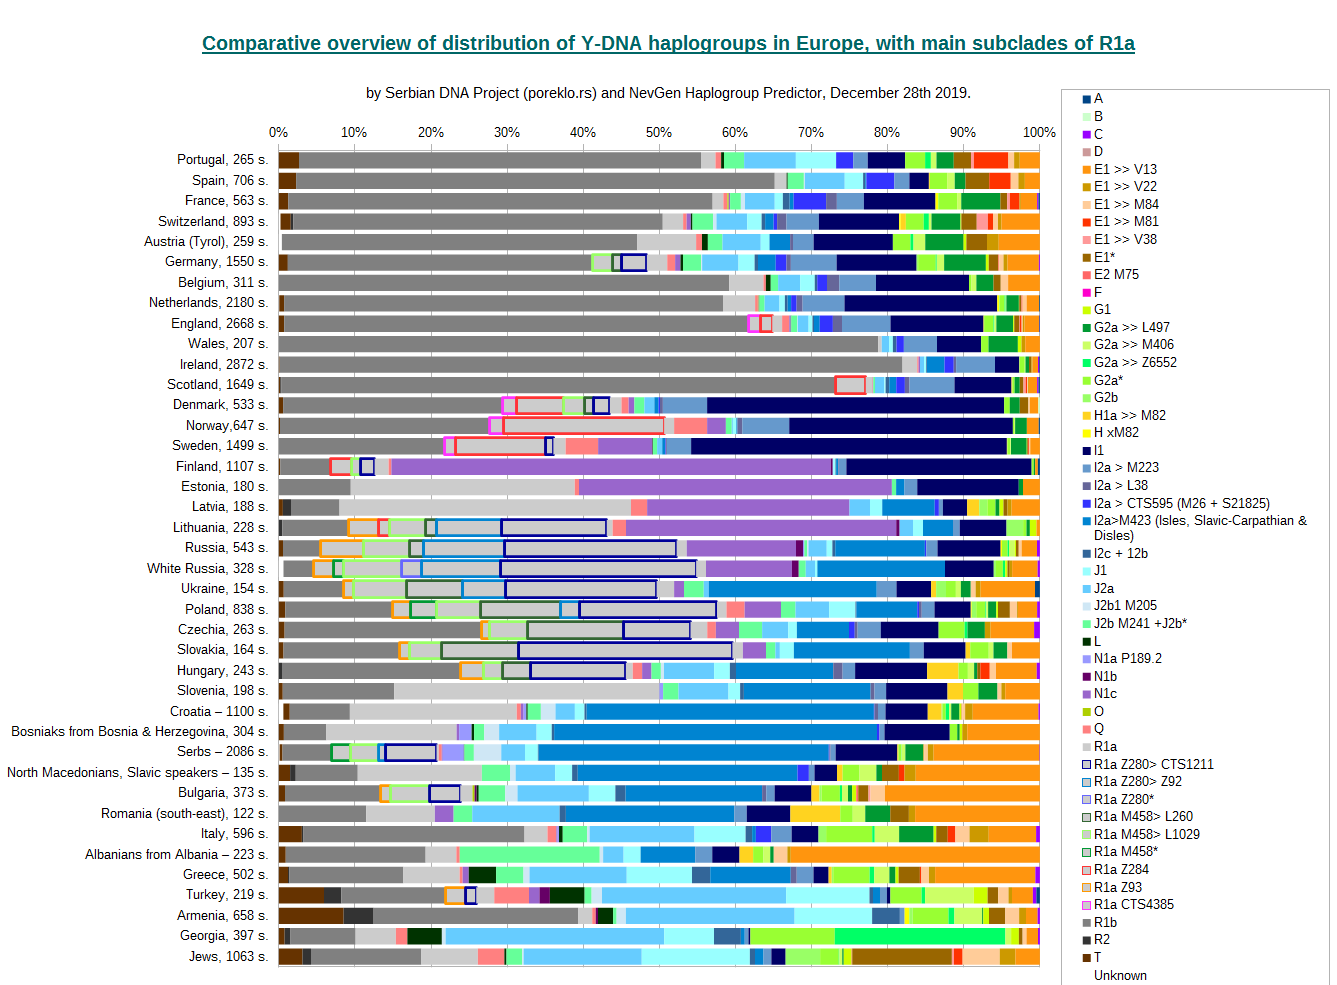 Comparative overview of distribution of Y-DNA haplogroups in Europe, with division of R1a - horizontal bars